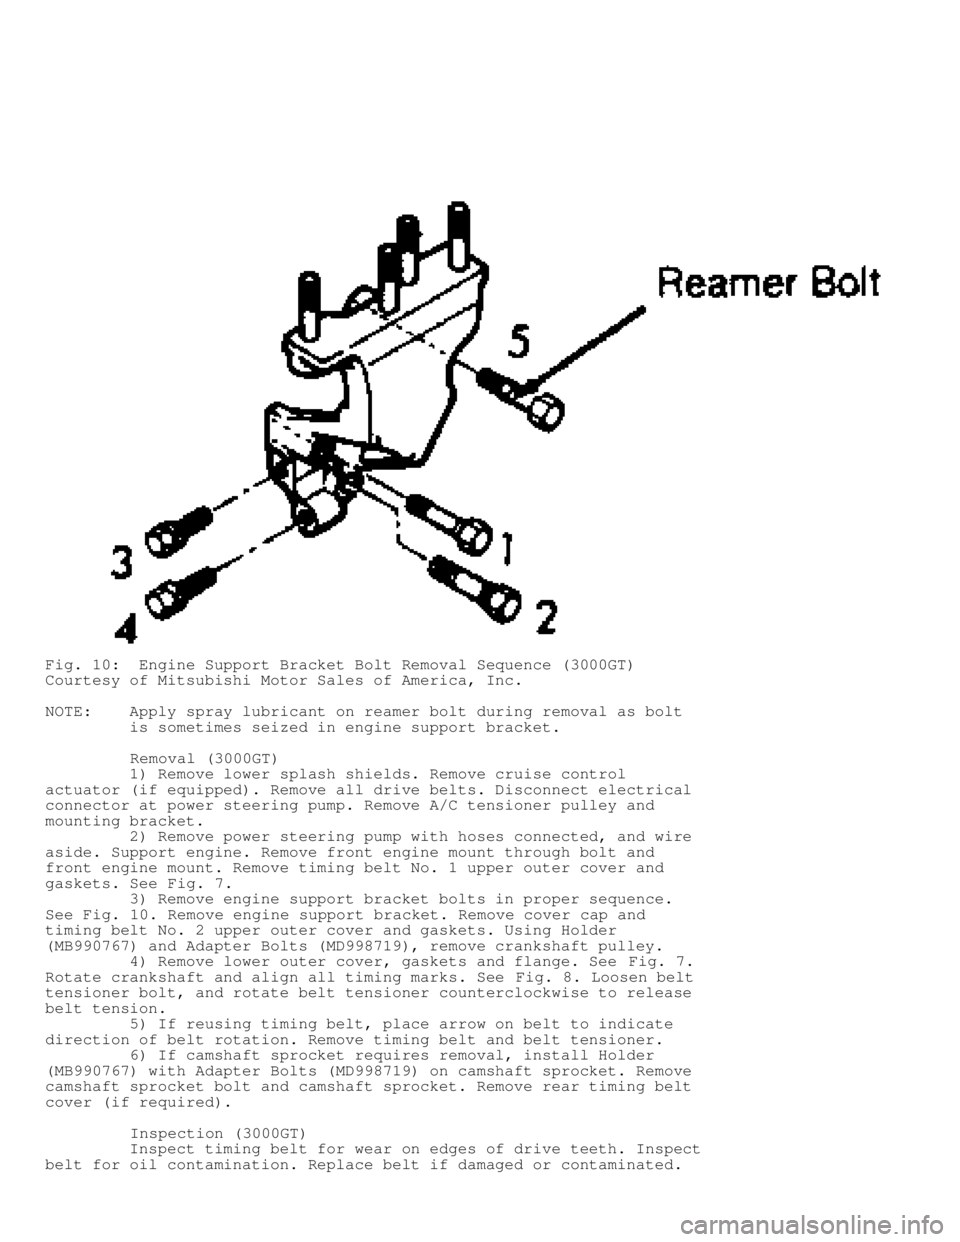 MITSUBISHI MONTERO 1991  Service Manual Fig. 10:  Engine Support Bracket Bolt Removal Sequence (3000GT)
Courtesy of Mitsubishi Motor Sales of America, Inc.
NOTE:    Apply spray lubricant on reamer bolt during removal as bolt
         is som